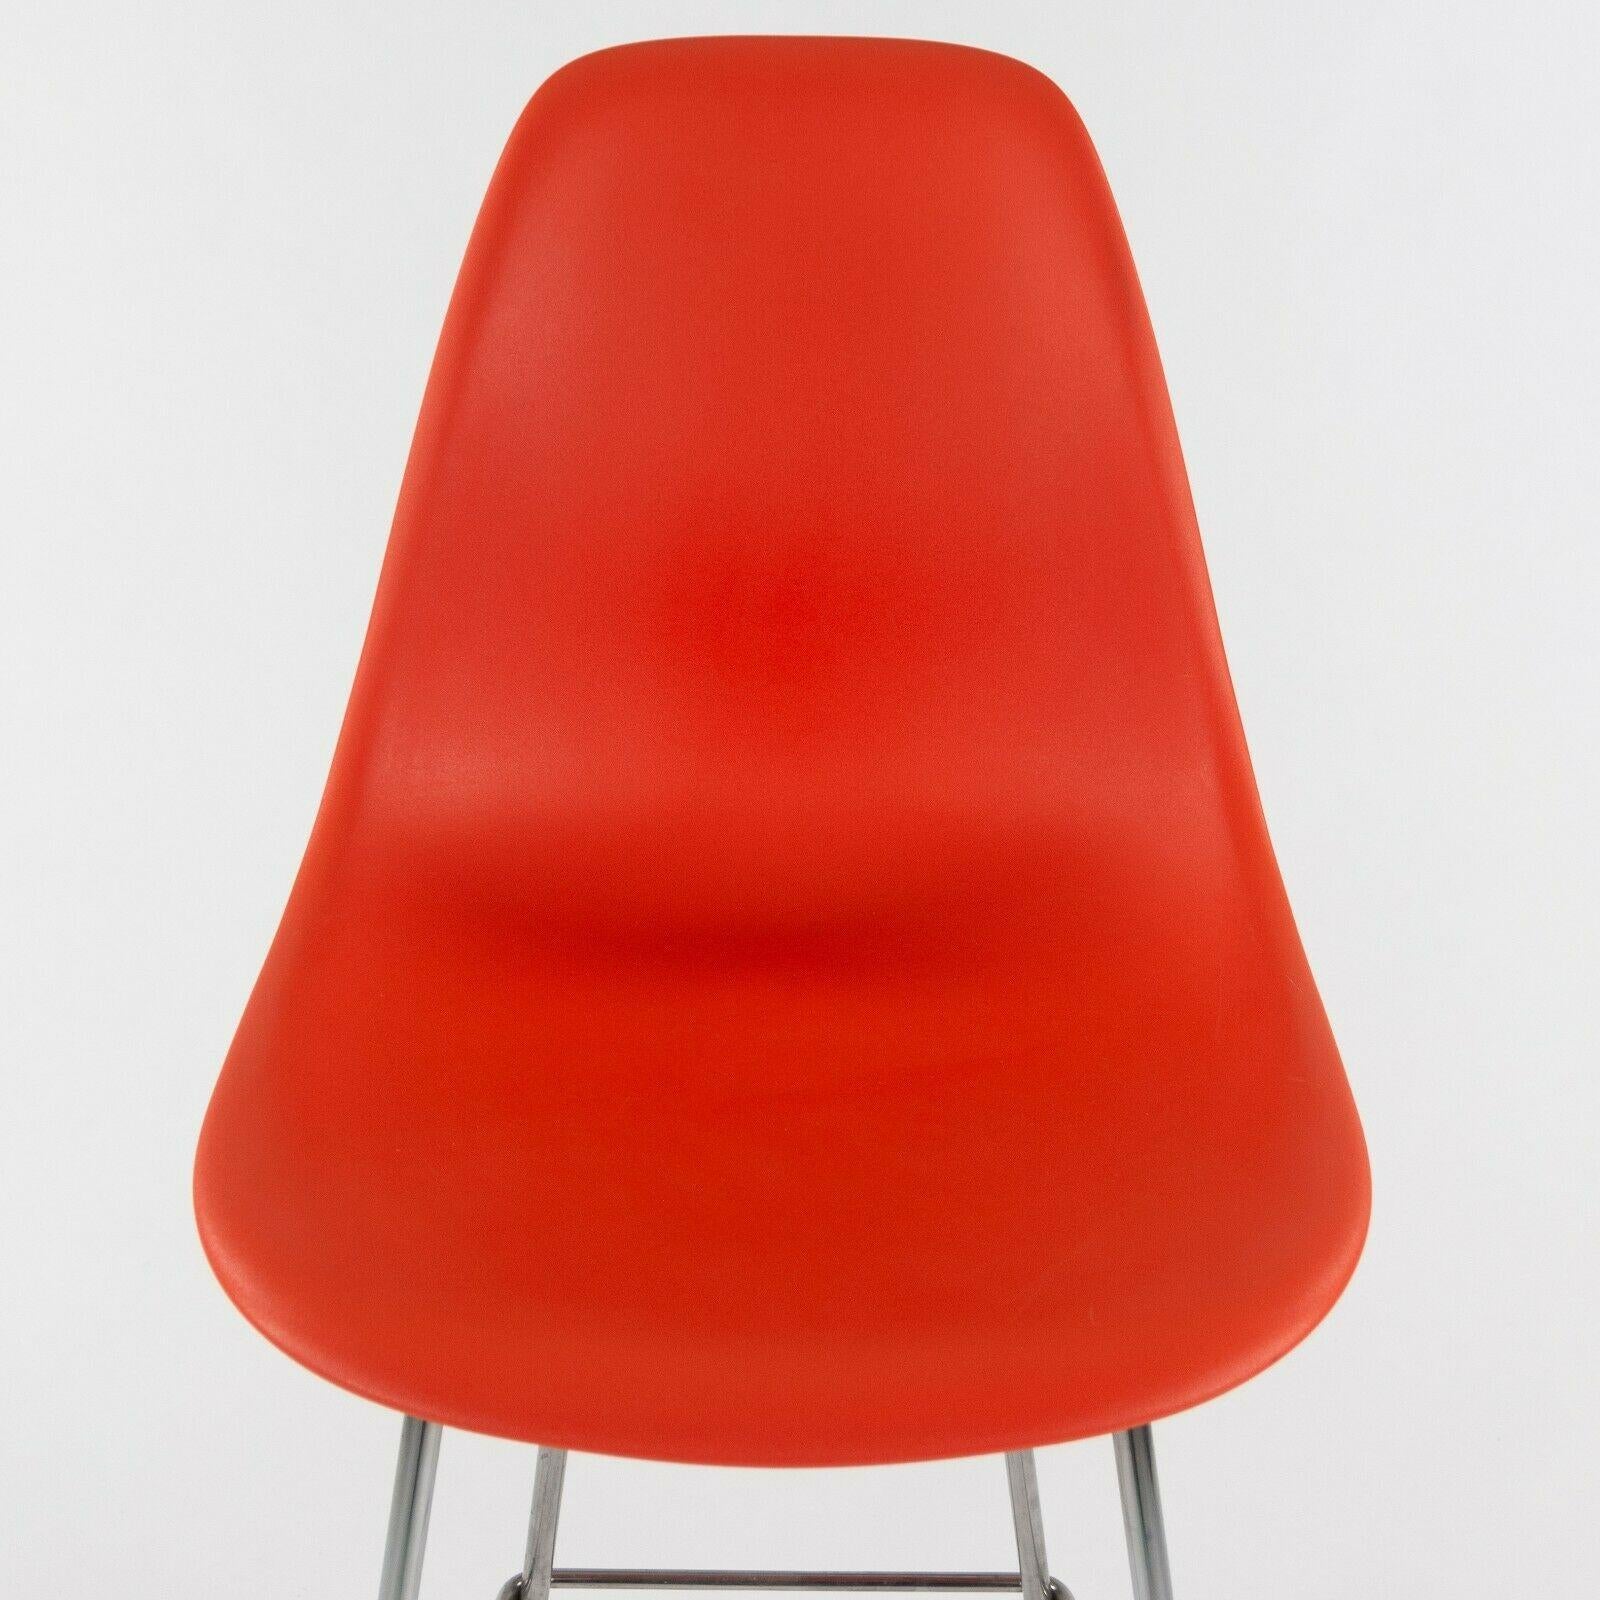 Ray and Charles Eames Herman Miller Molded Shell Bar Stool Chair Red/Orange 2